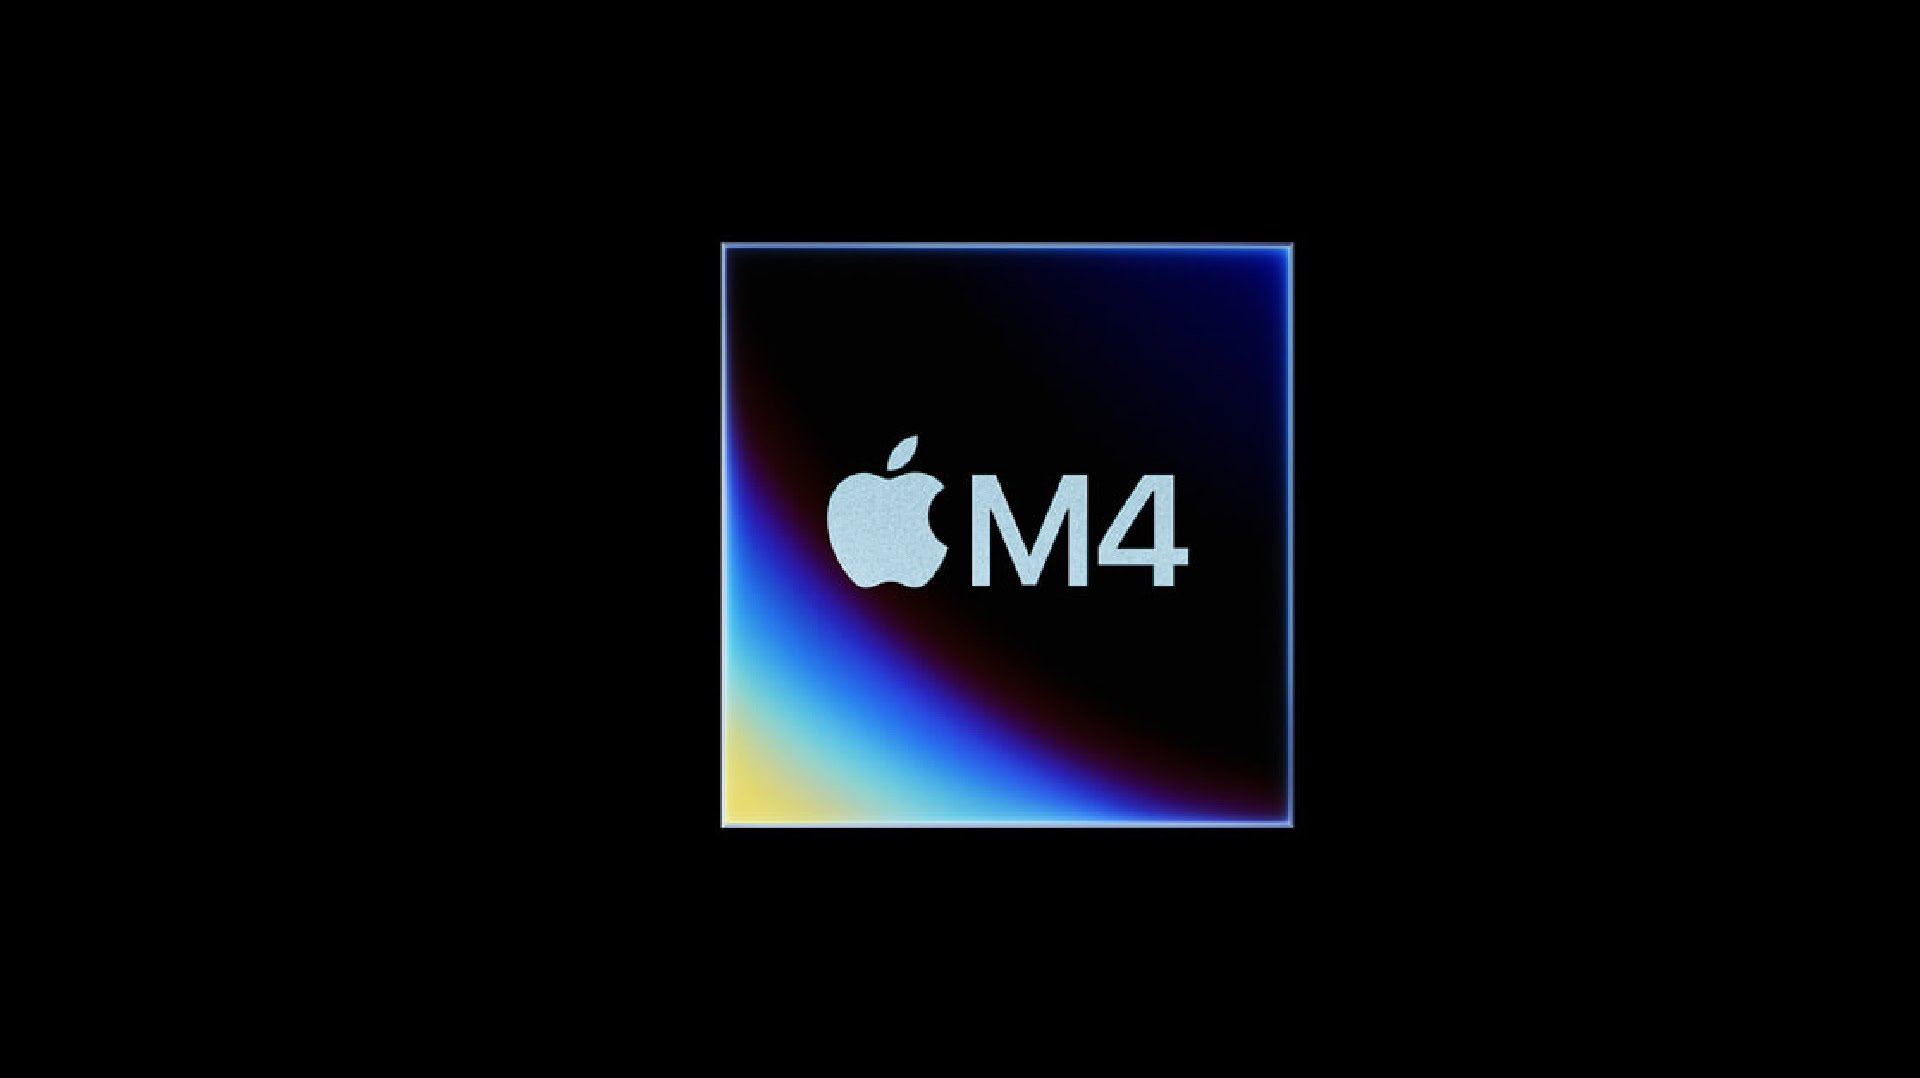 Apple's M4 chip brings the power of AI and console-quality graphics to the iPad Pro